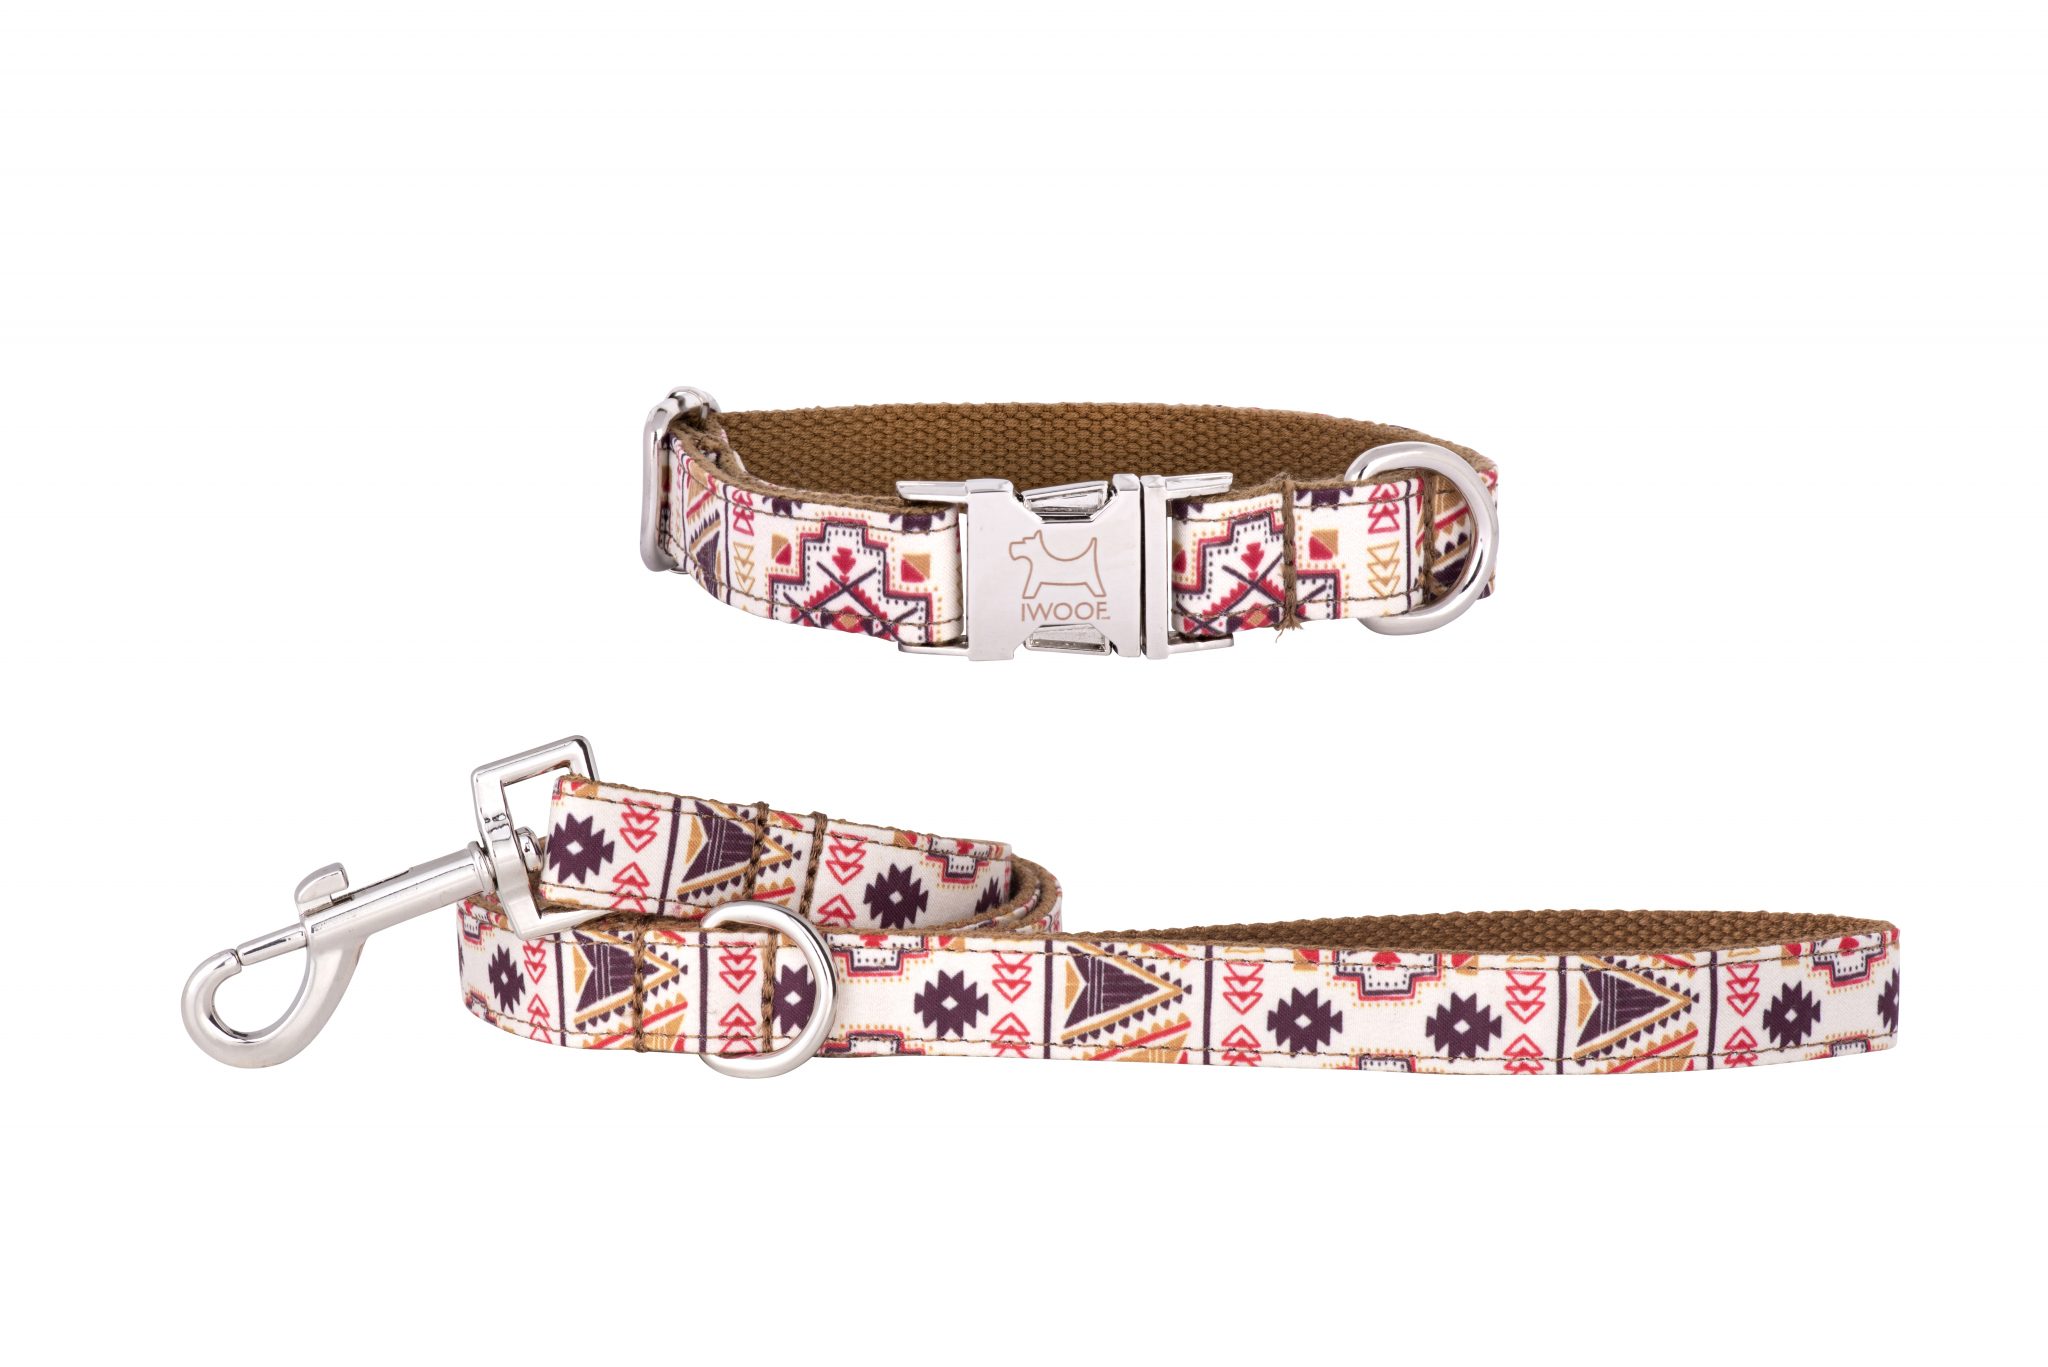 Aztec designer dog collar and dog lead set by IWOOF